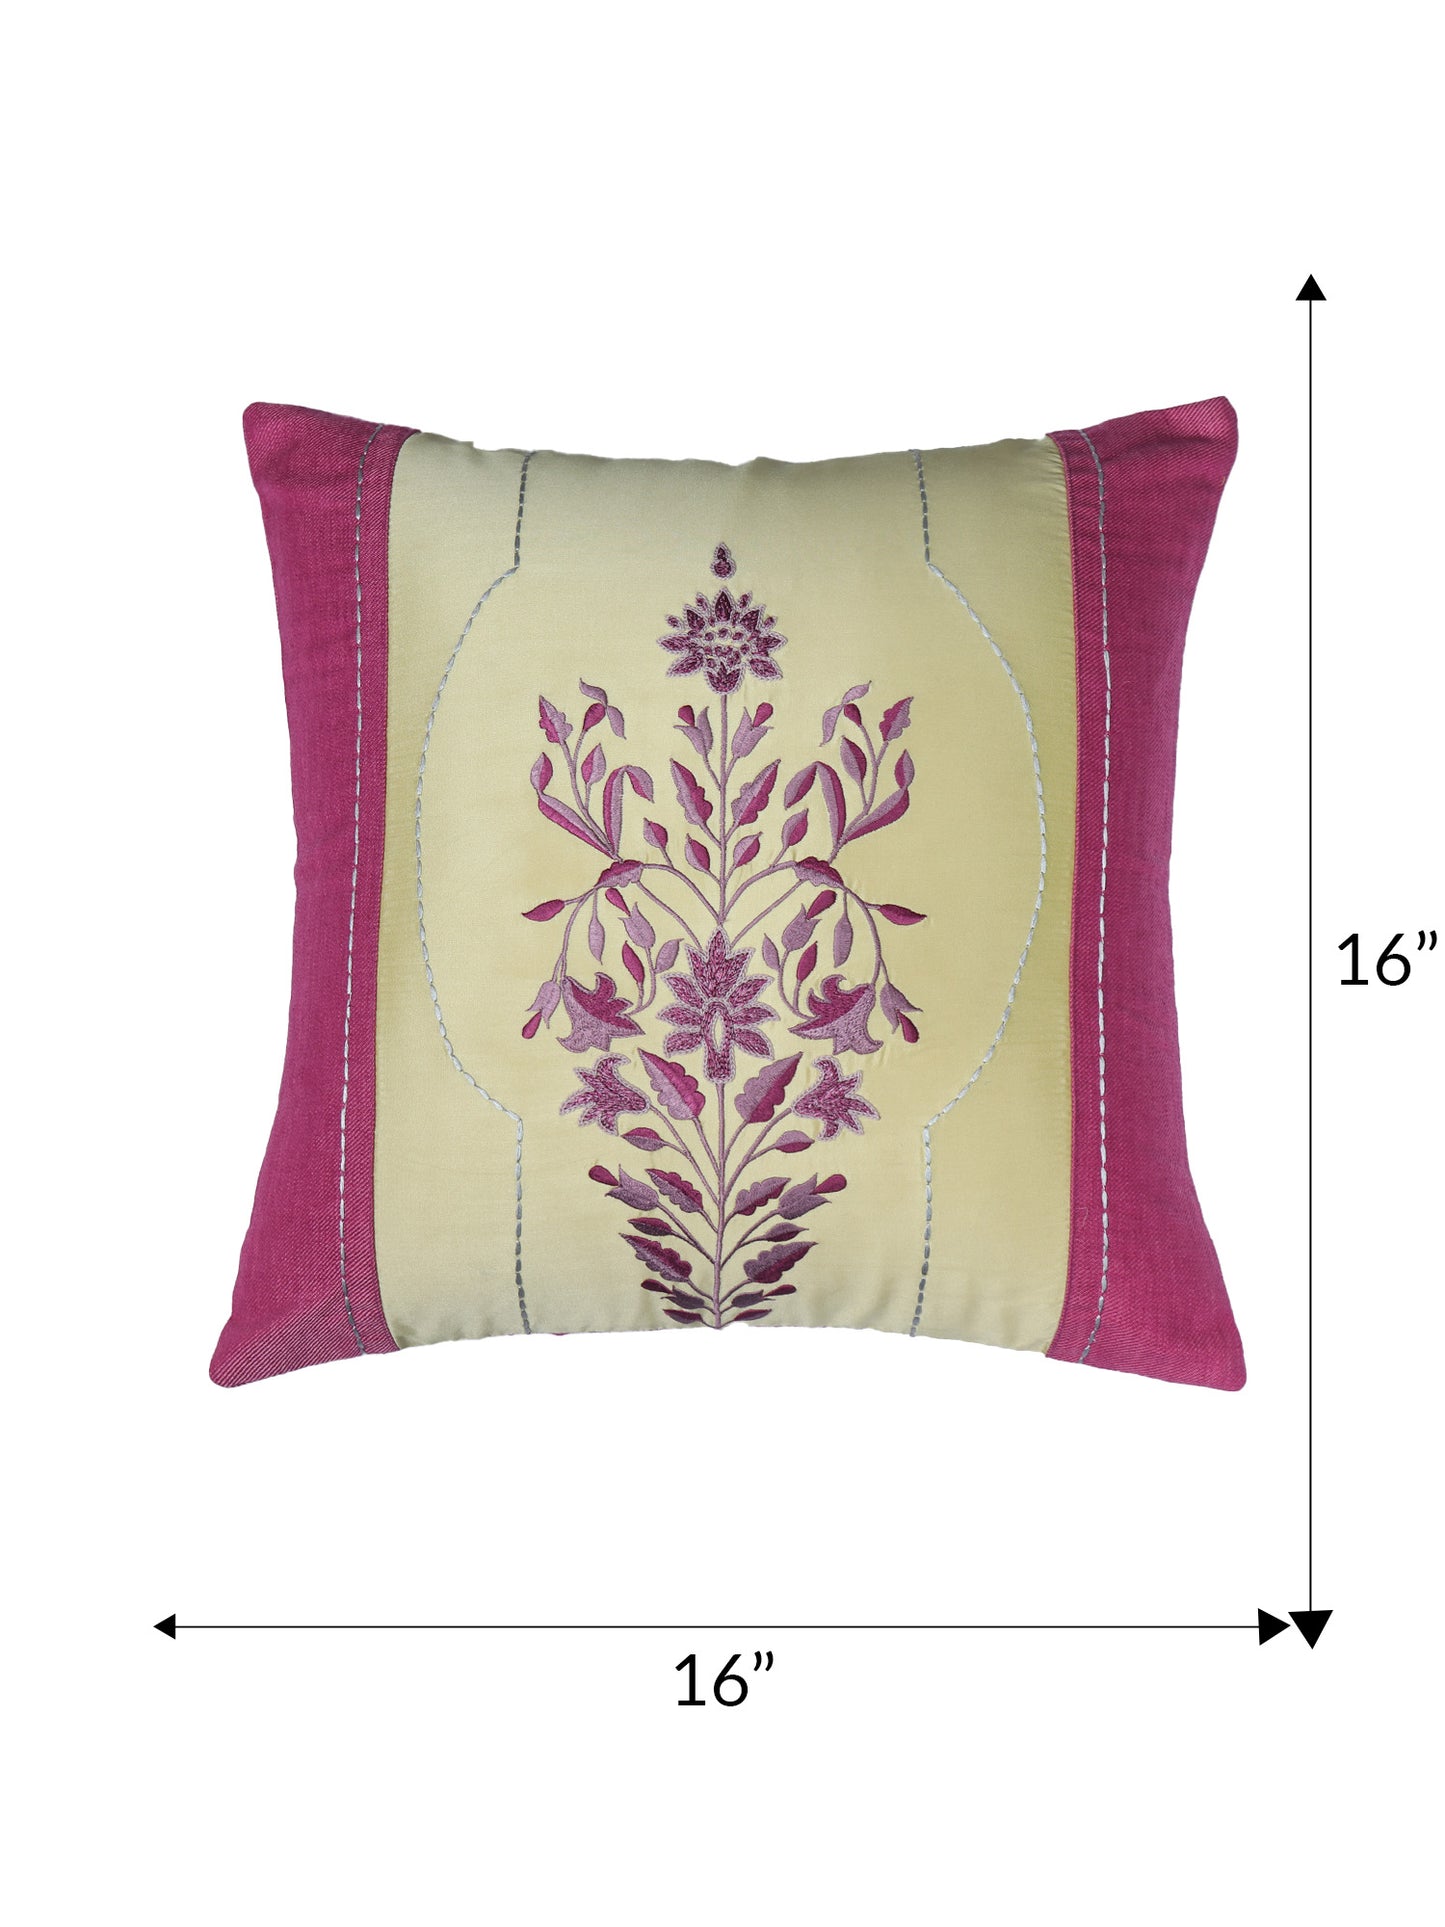 Hand Embroidered Cushion Cover - Luxe Collection | Sofa, Bedroom, Couch | Polycanvas Patch of Floral Embroidery - Multicolor - 16x16 inch (40x40 cms) (Pack of 1)